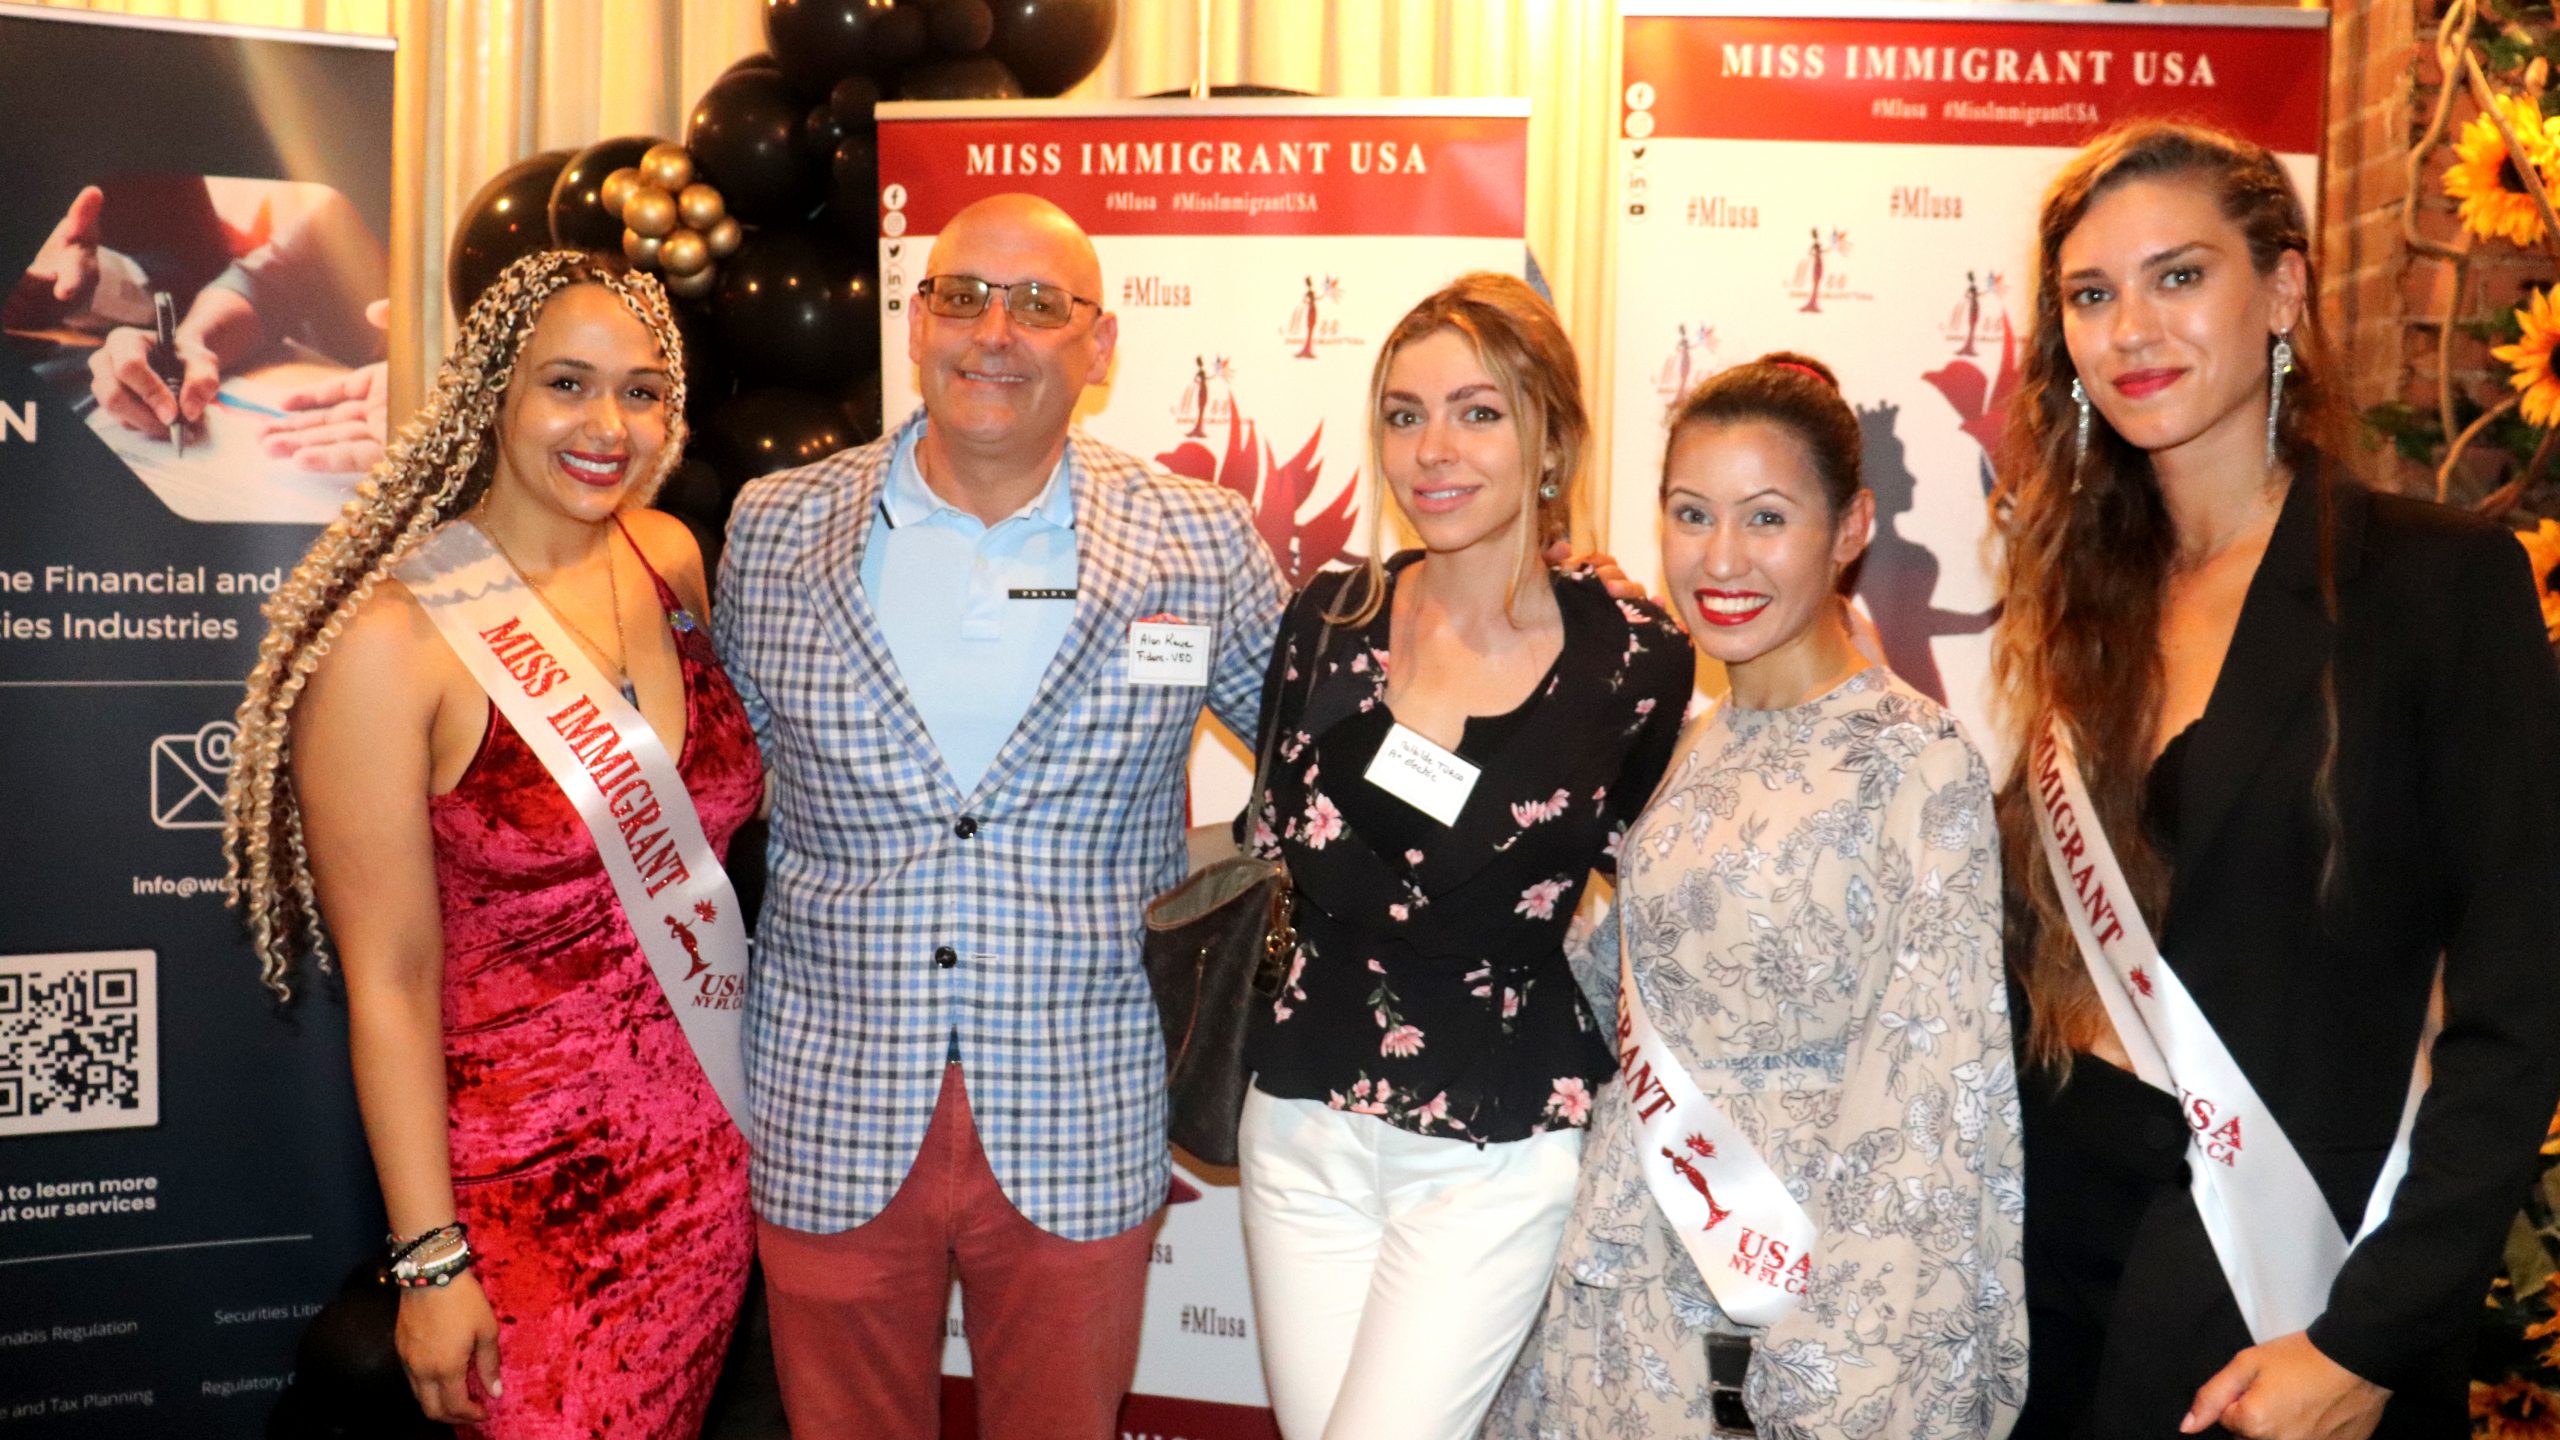 Miss Immigrant USA business Networking event